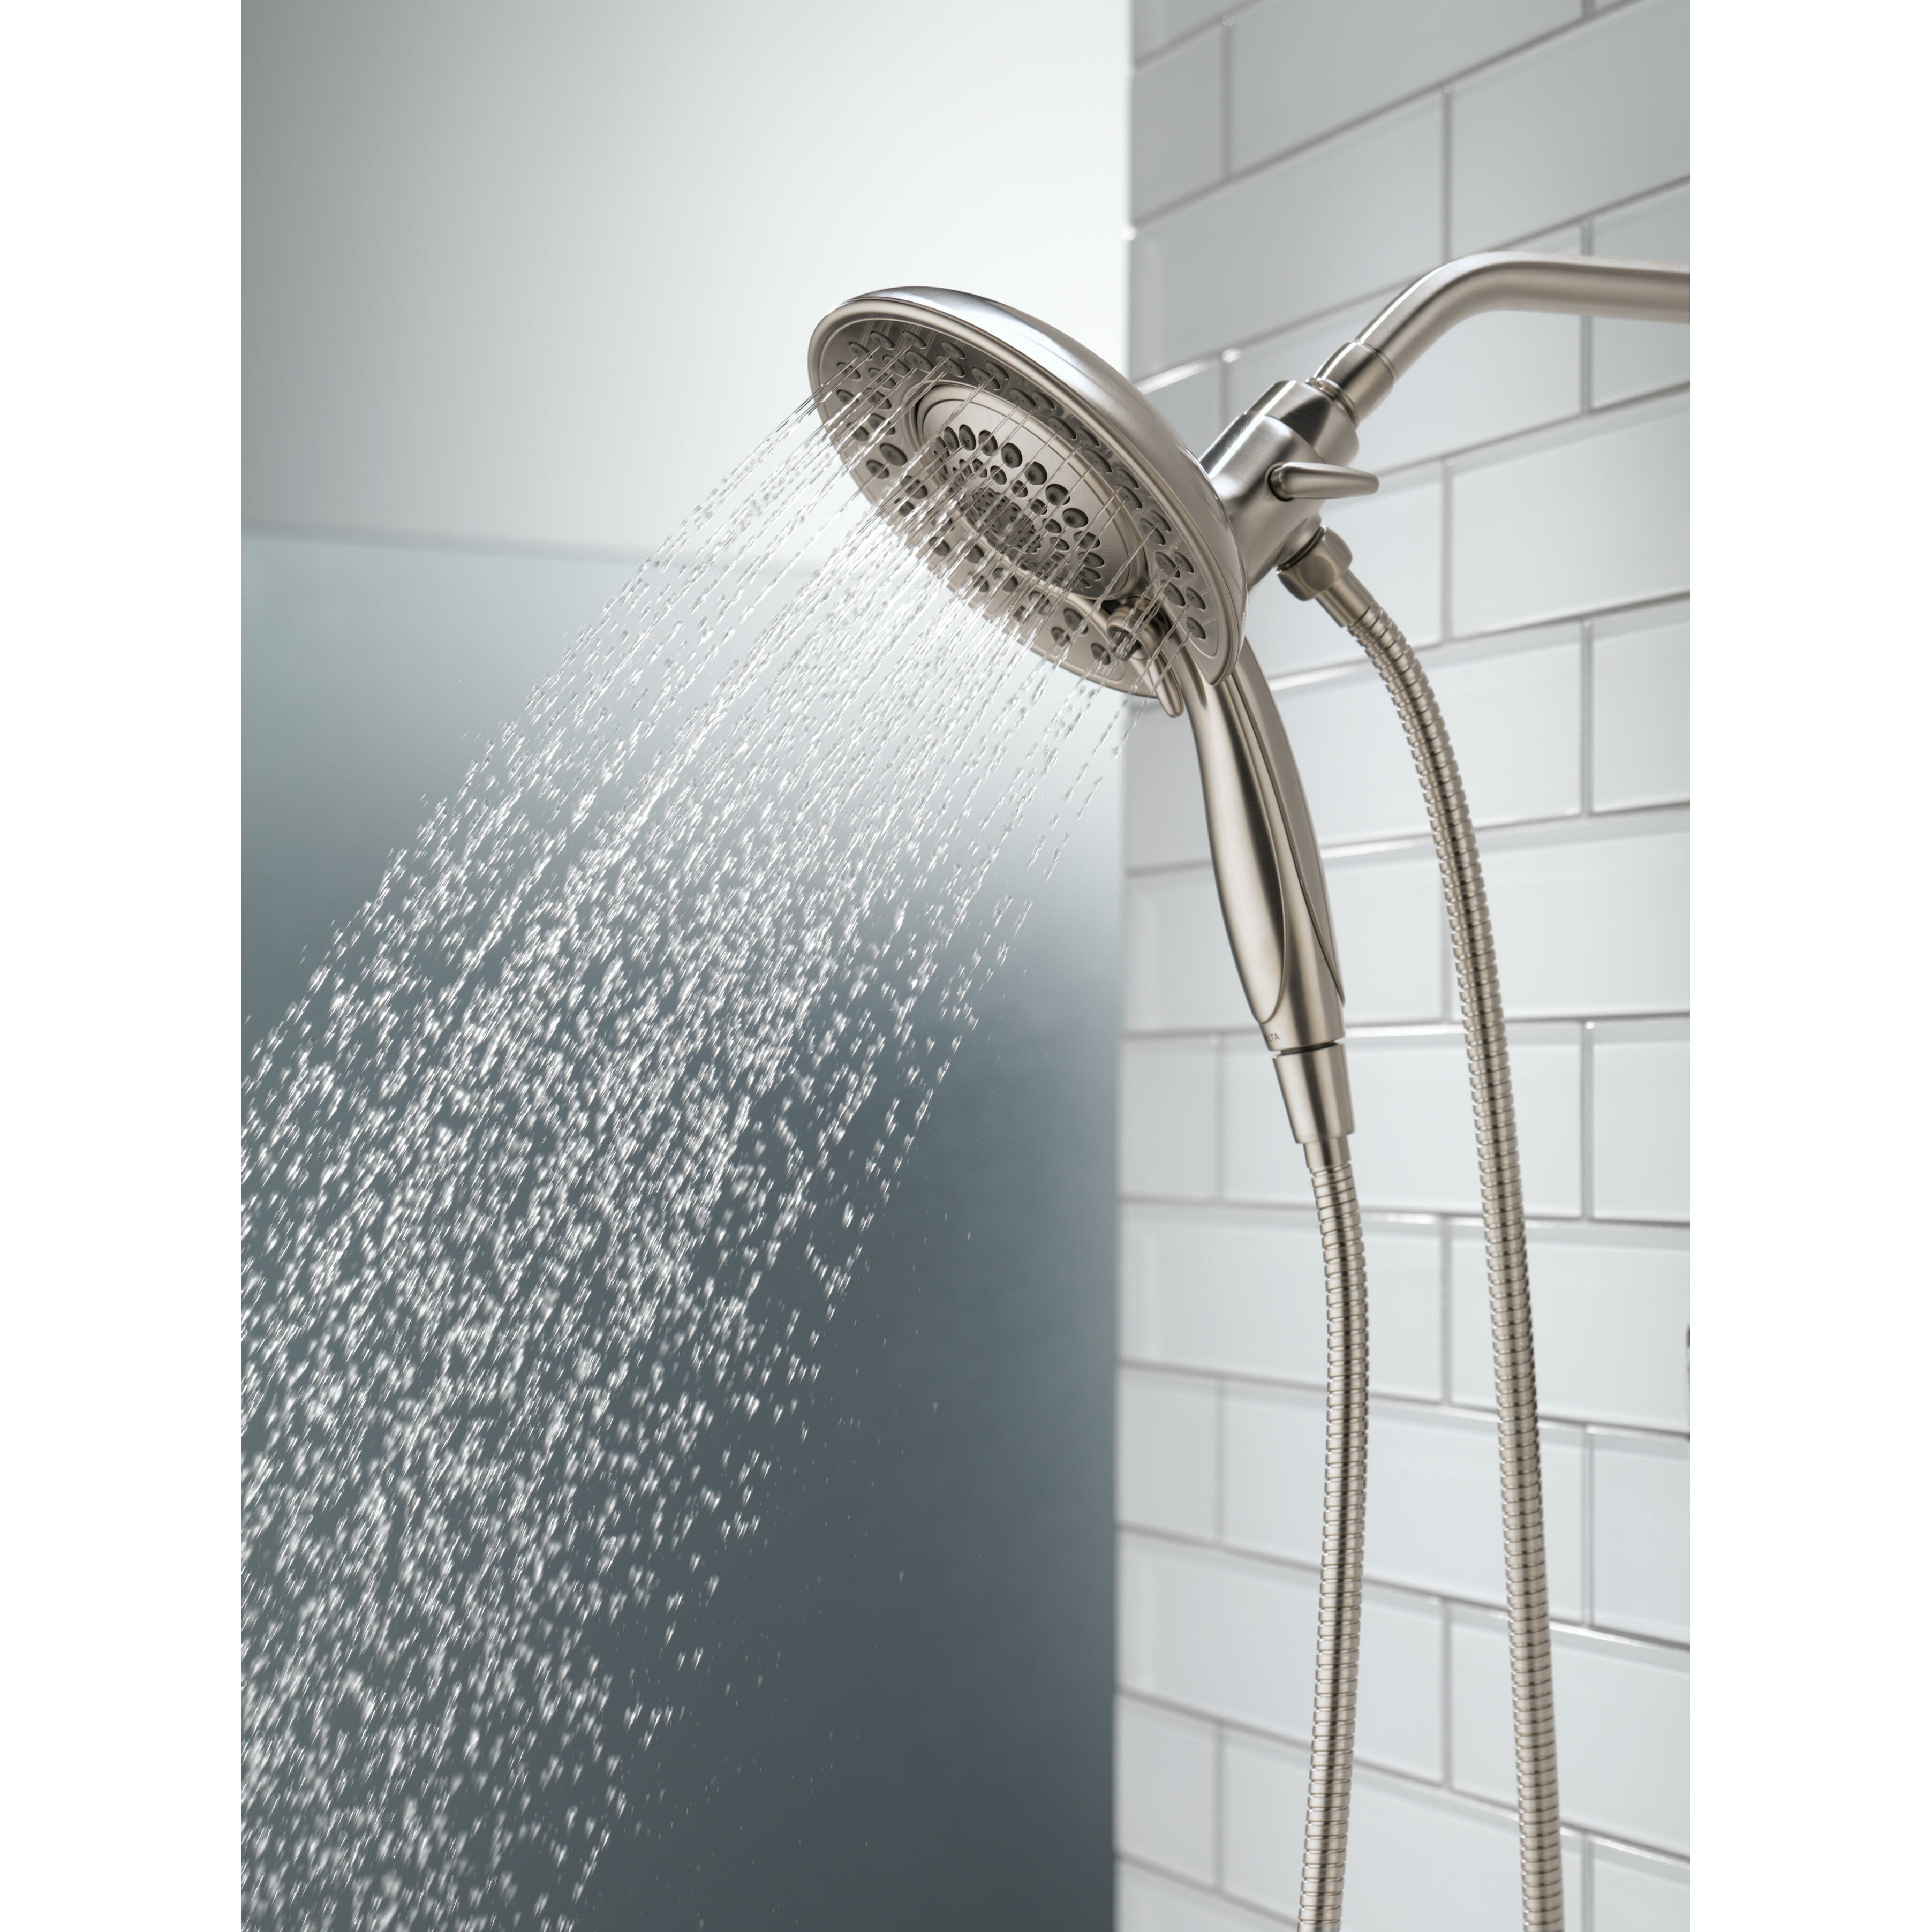 Delta In2ition Delta Shower Head Review